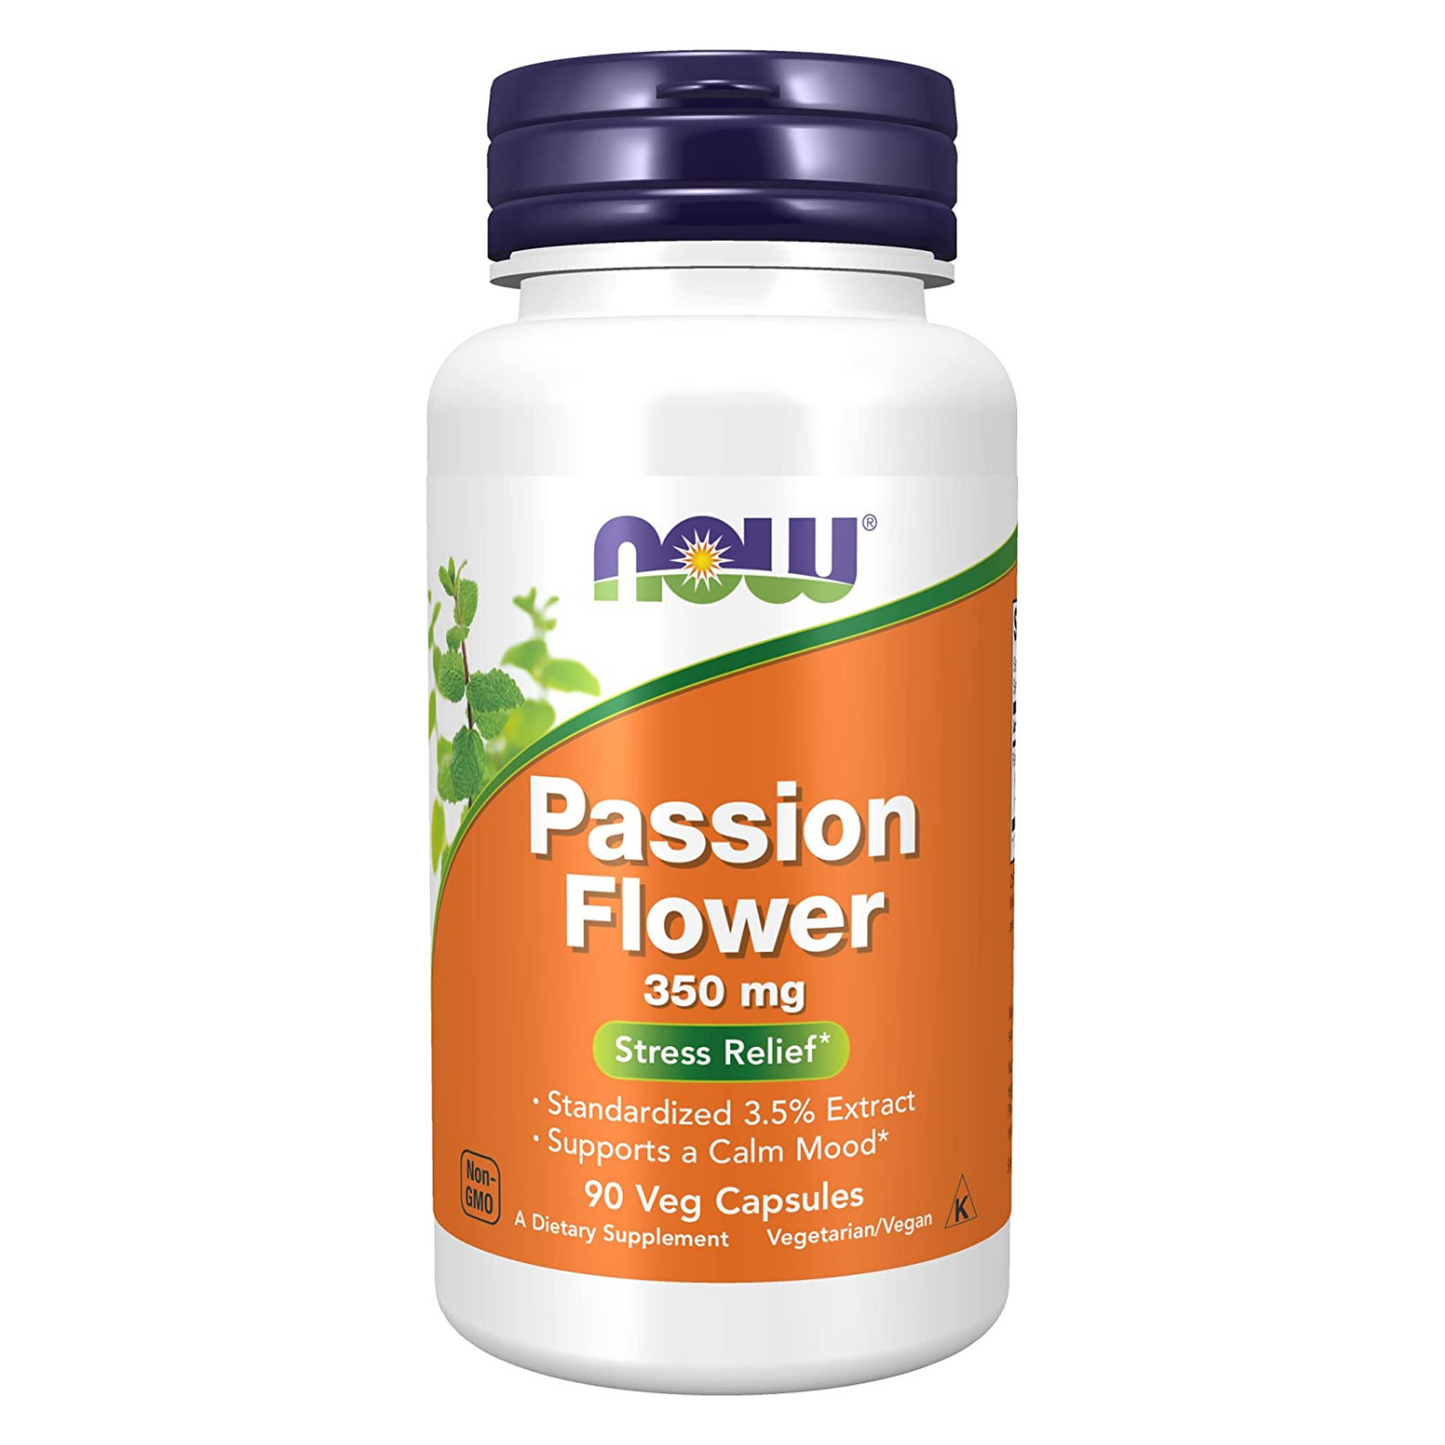 NOW - Passion Flower 350 mg, Natural Stress Relief - 90 Veg Capsules